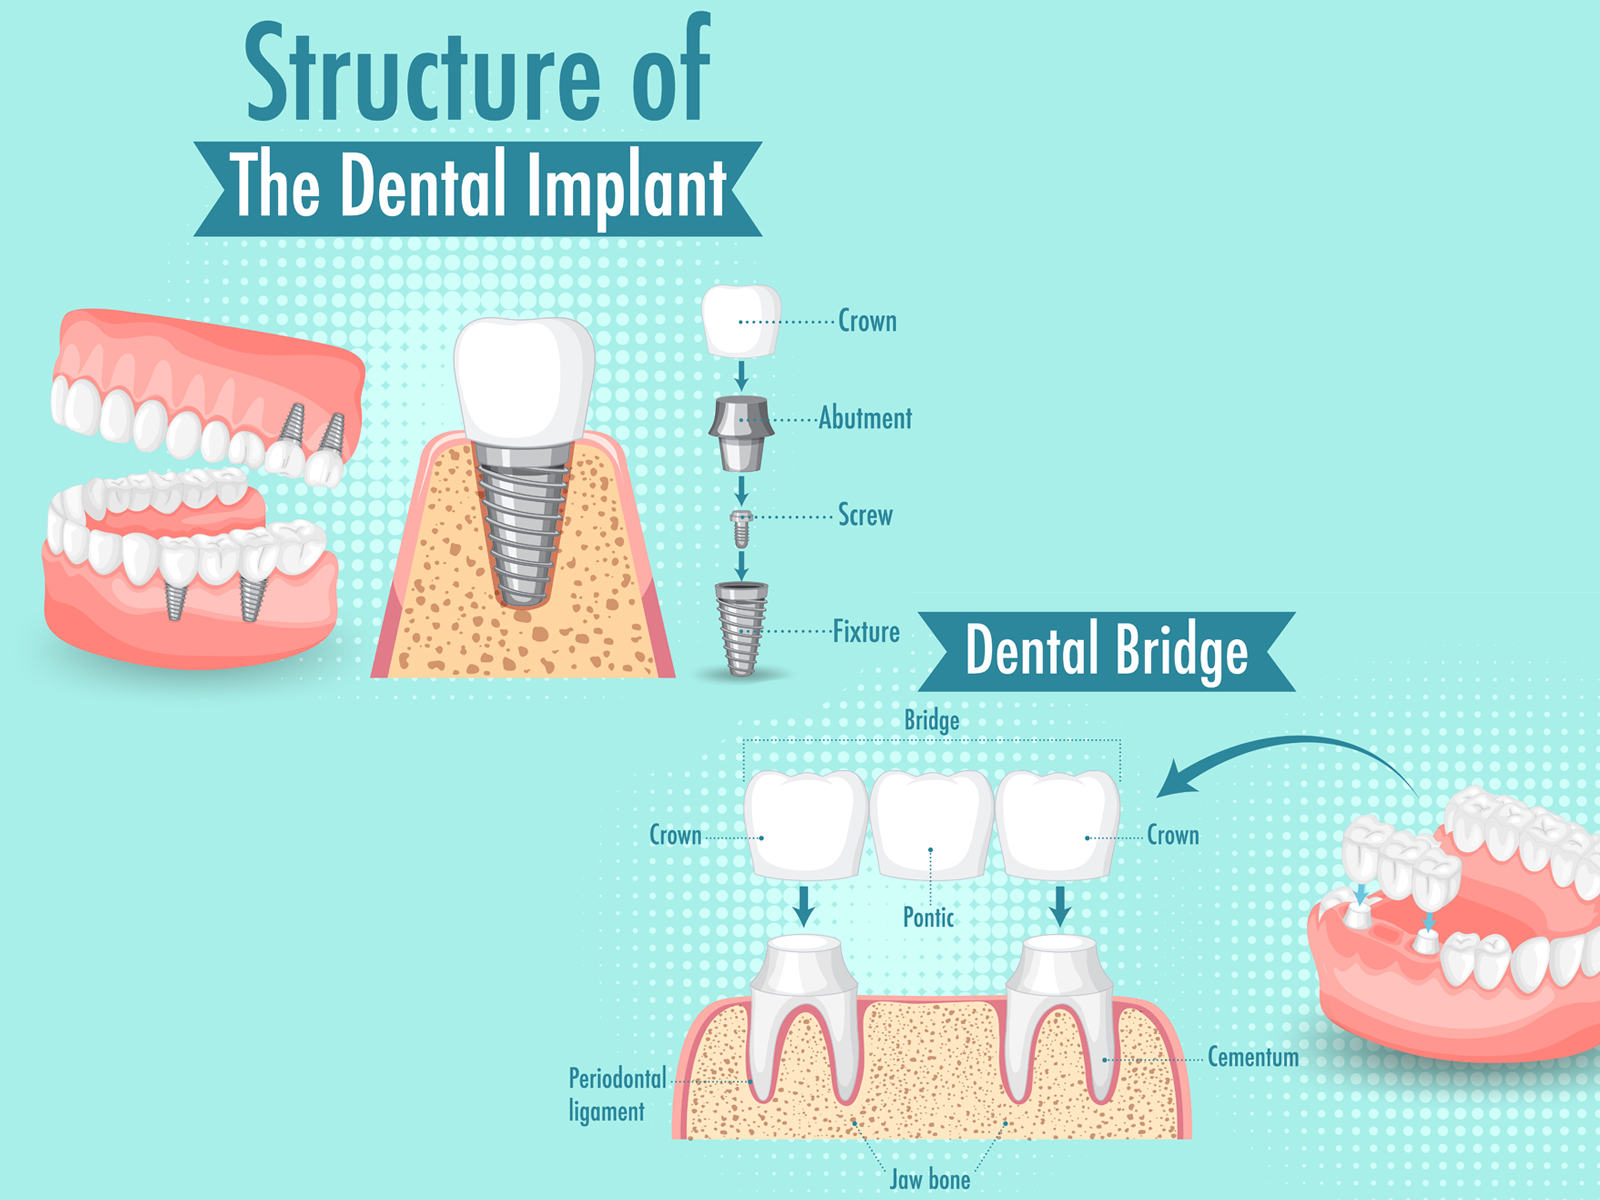 What is the cost difference between dental bridges and implants?